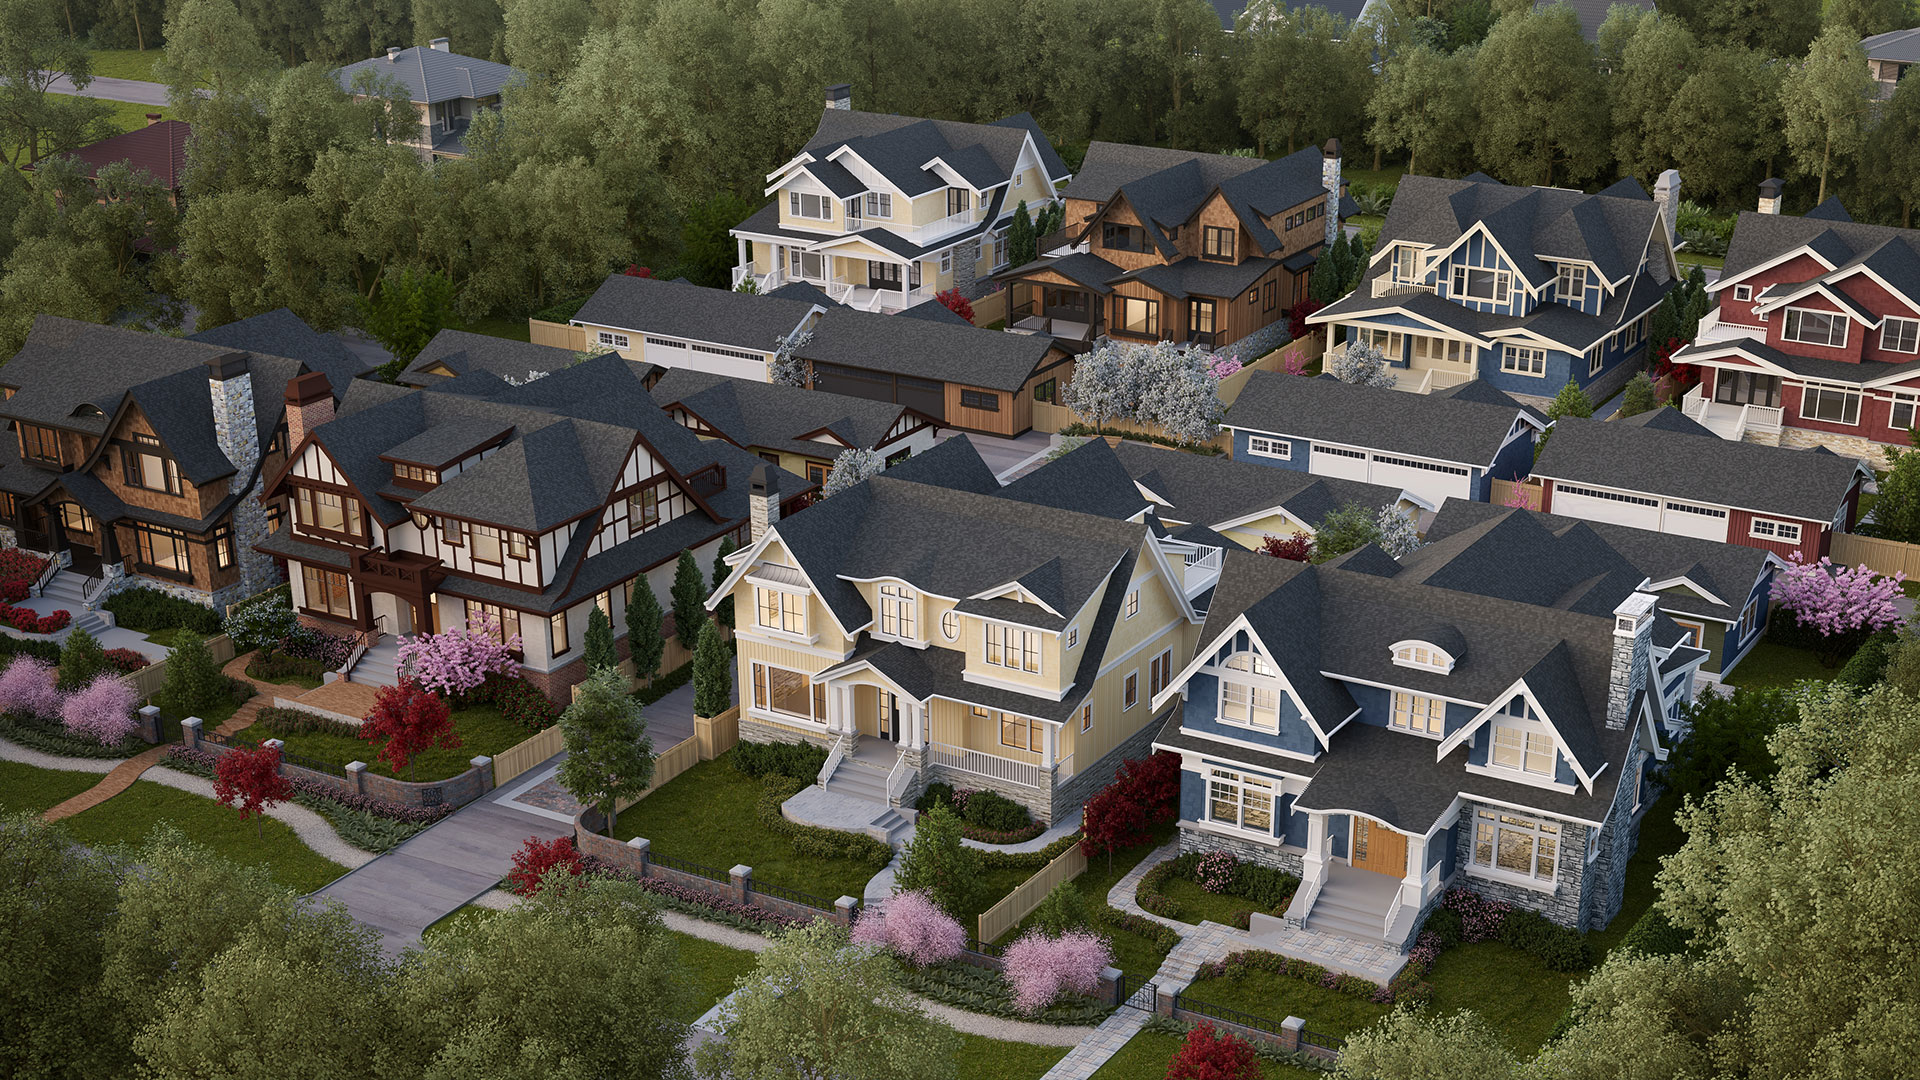 McCleery & Magee: The Estates at Southlands – Prices, Availability, Plans